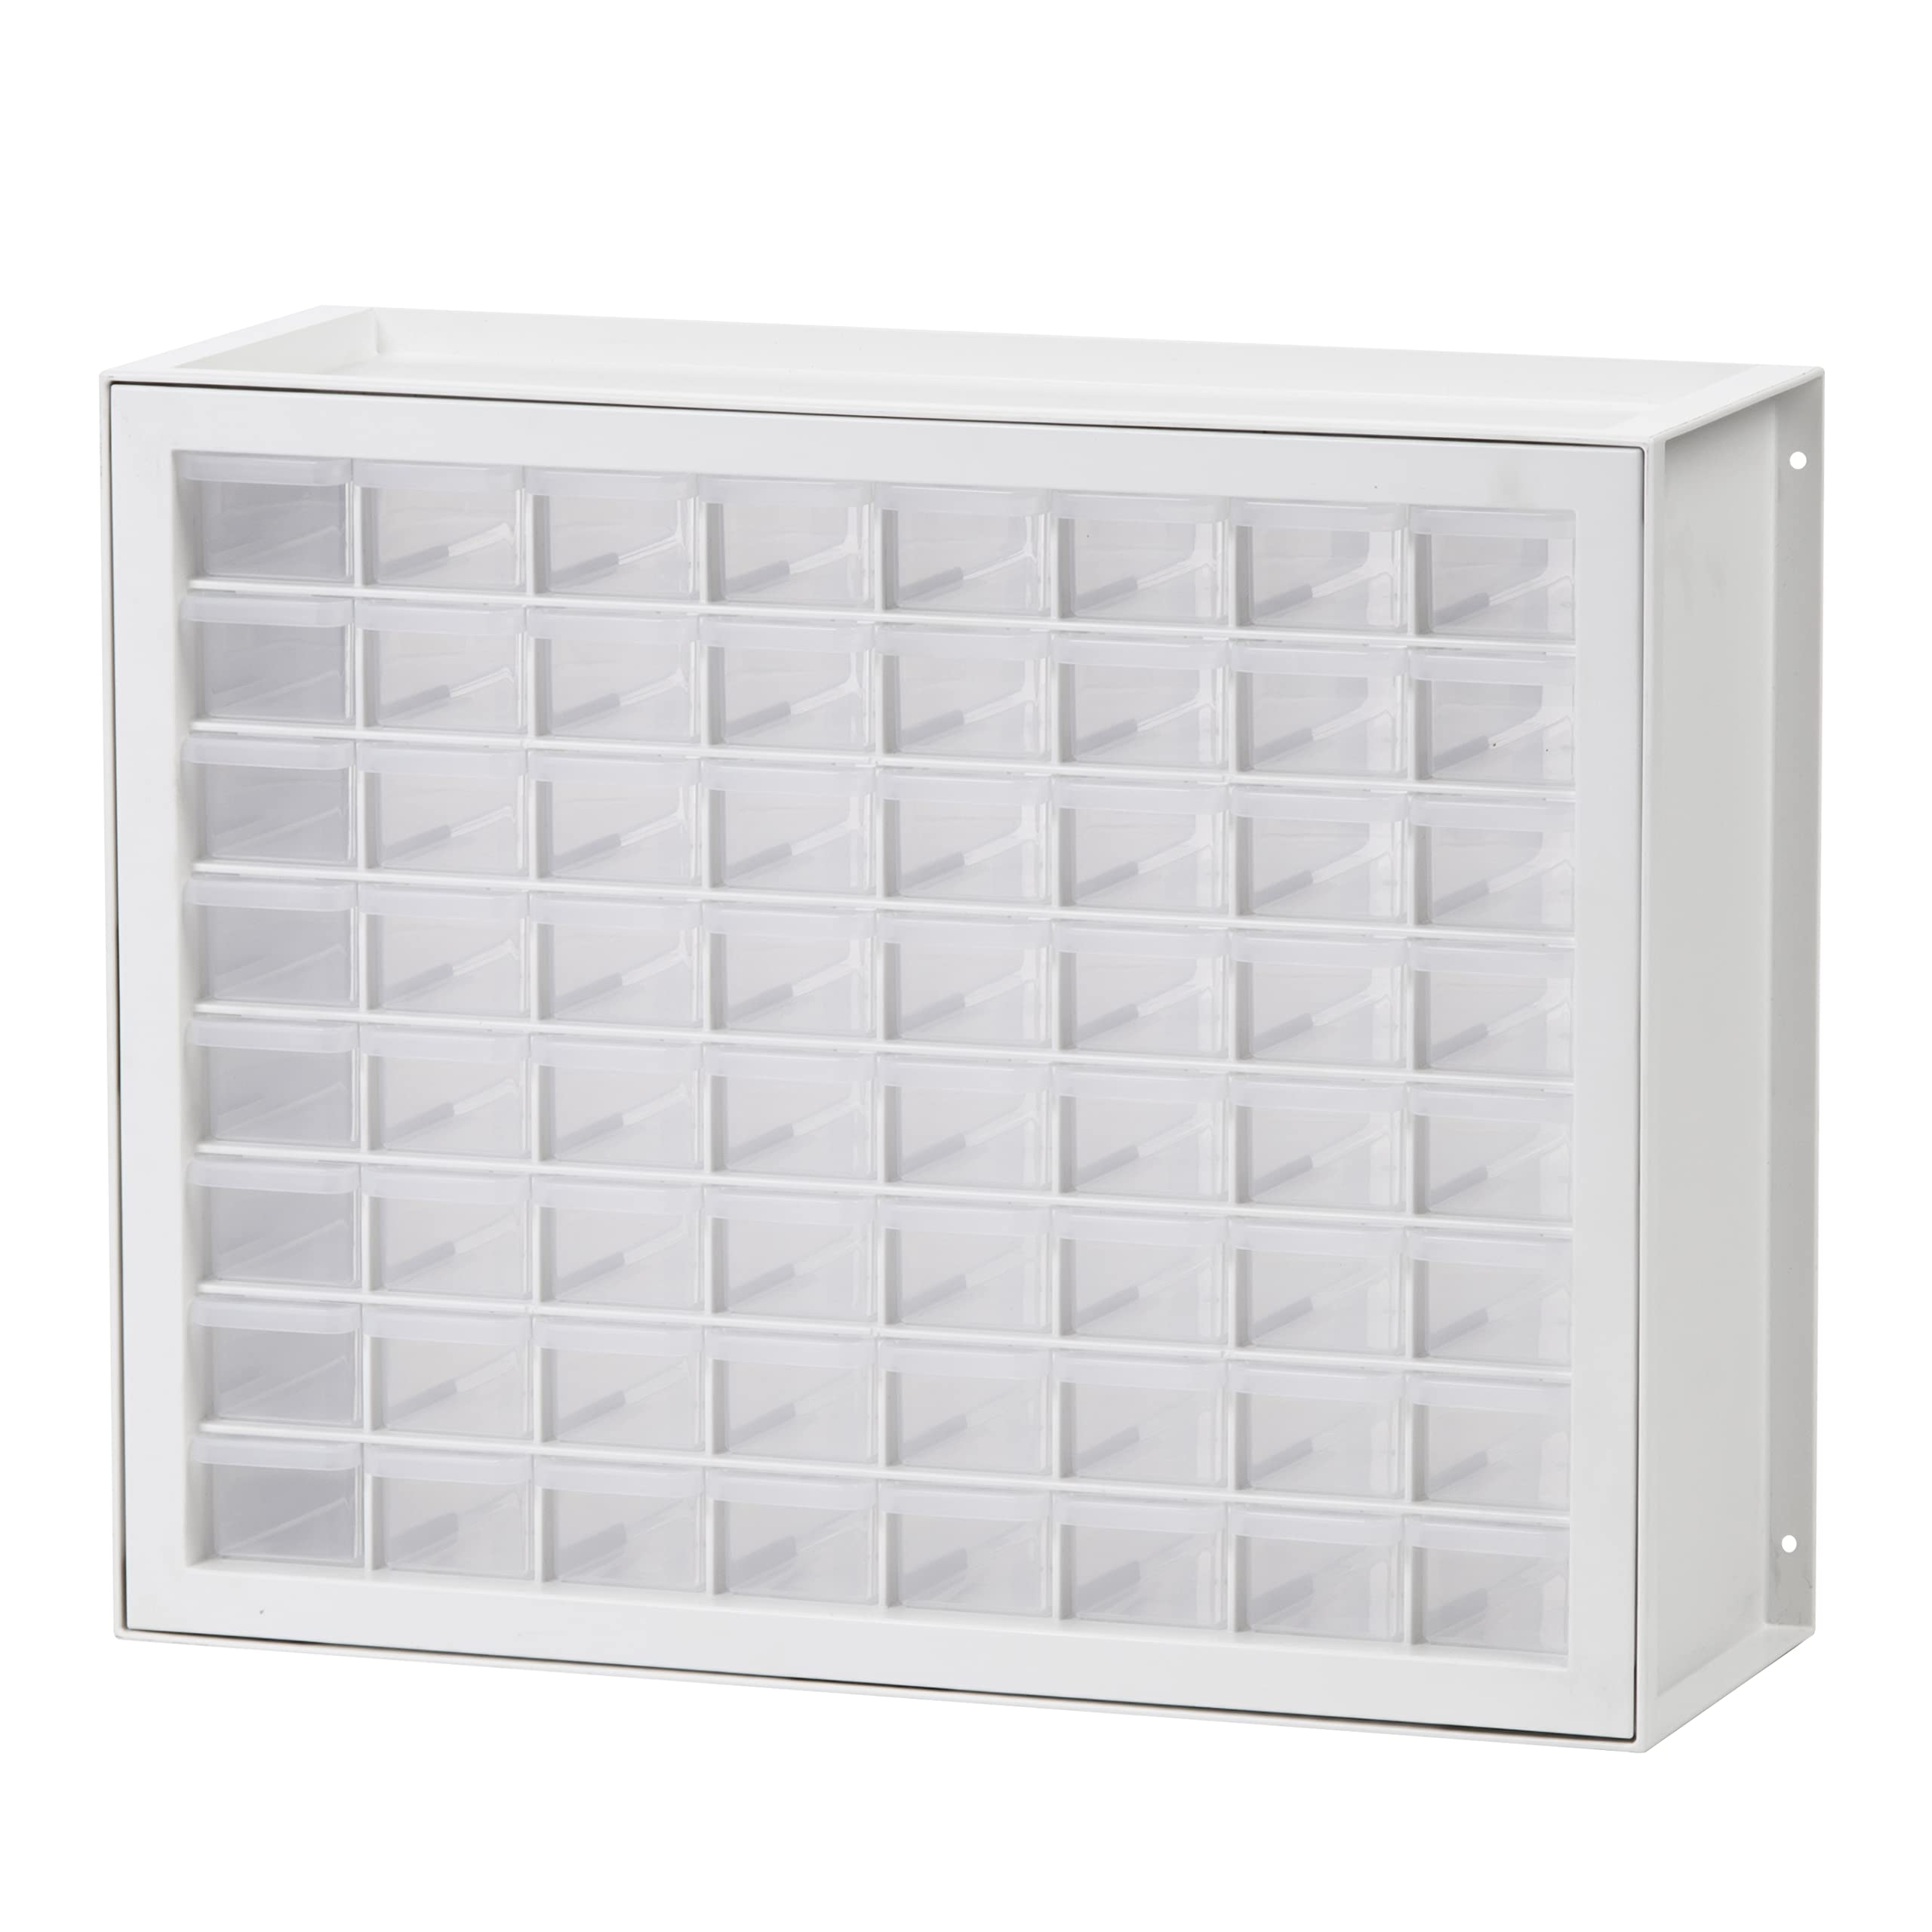 IRIS USA 64 Drawer Stackable Storage Cabinet for Hardware Crafts and Toys, 19.5-Inch W x 7-Inch D x 15.5-Inch H, White - Small Brick Organizer Utility Chest, Scrapbook Art Hobby Multiple Compartment